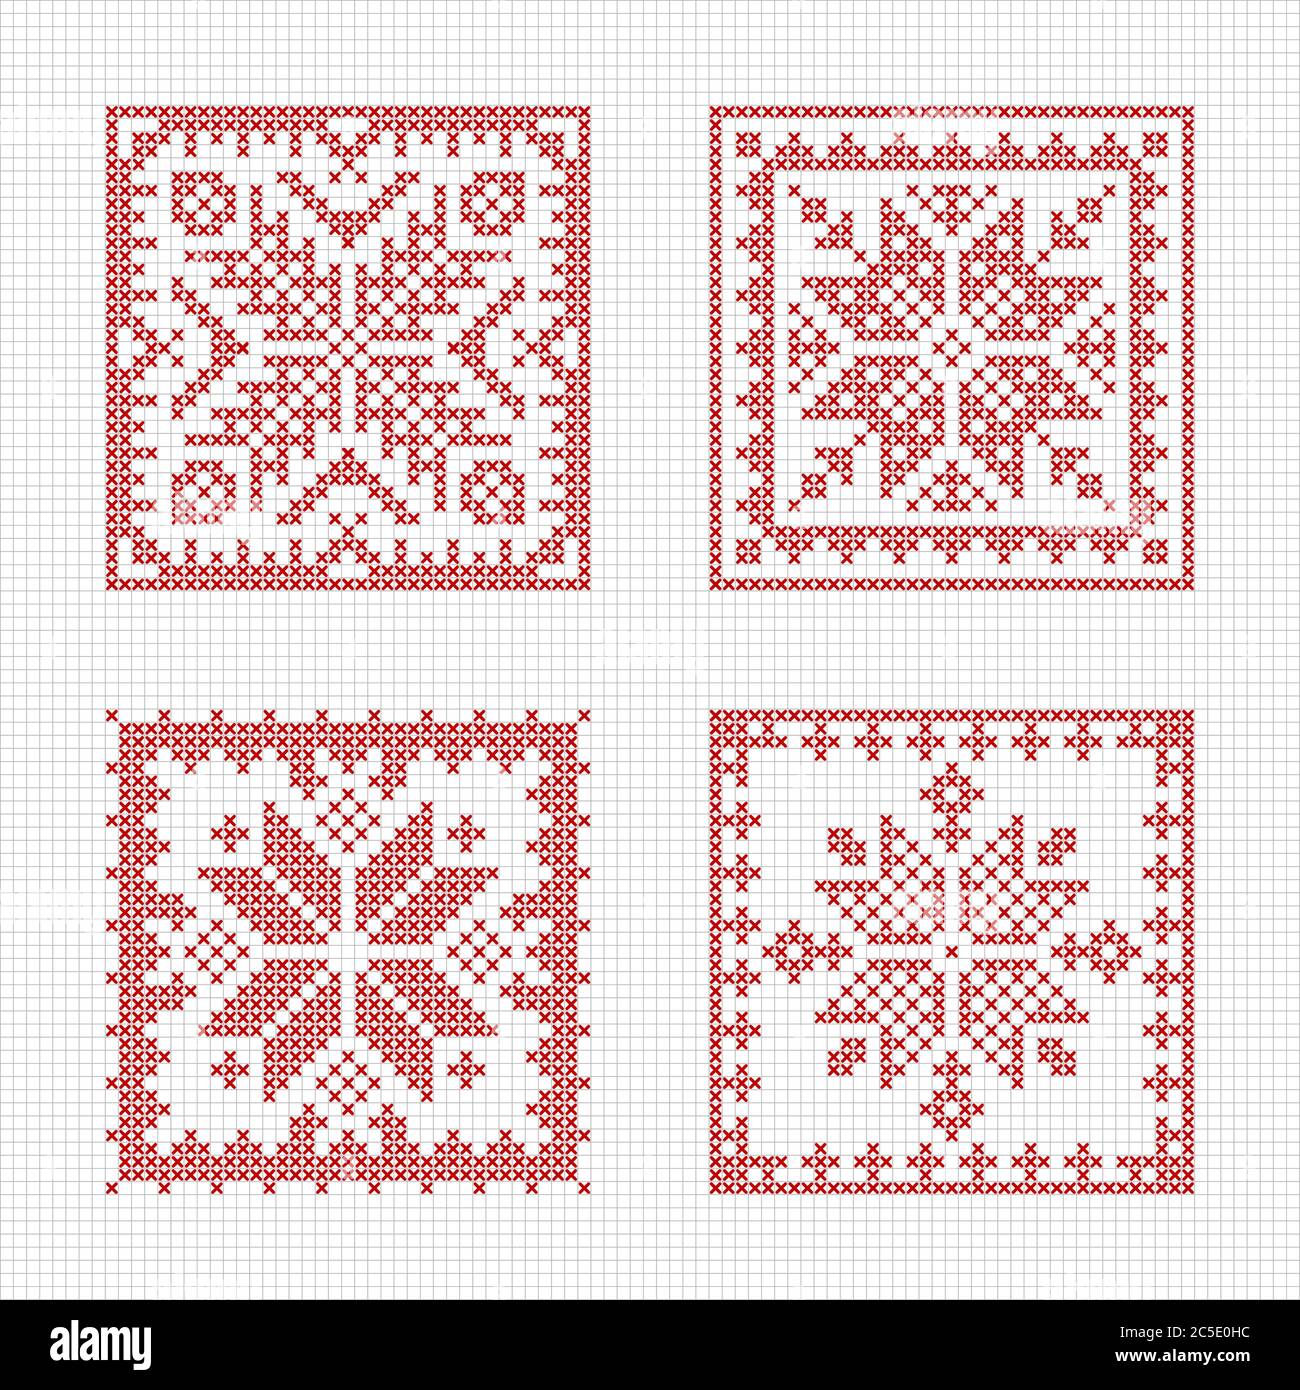 Carpet Cross Stitch Pattern, Ornament Counted Cross Stitch Chart, Sampler,  Pillow,modern Embroidery, Christmas Decor, Instant Download PDF 